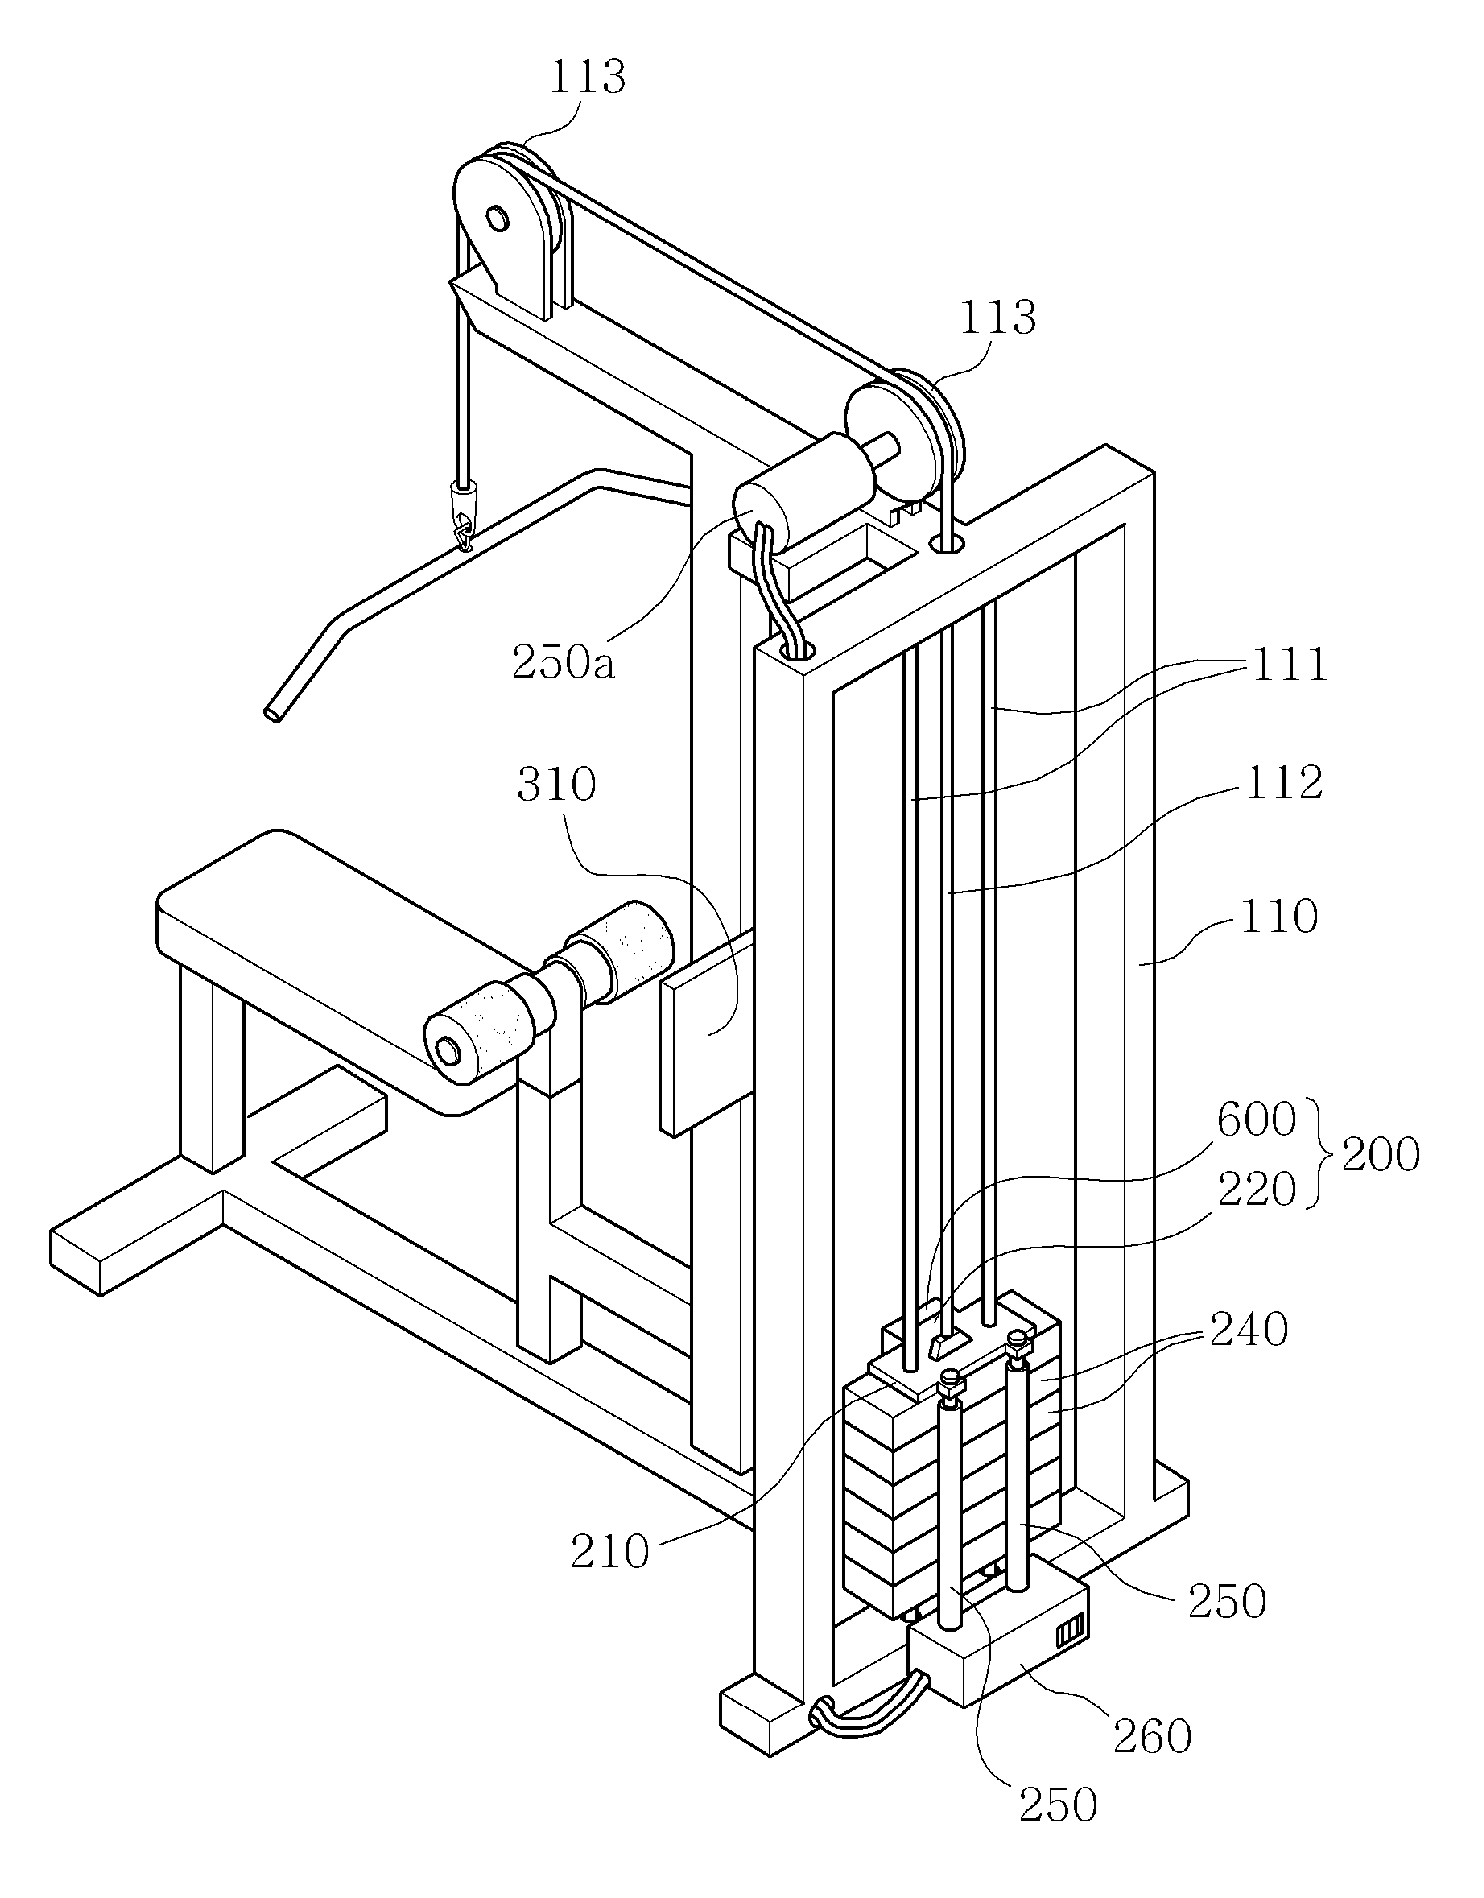 Weight-training machine having independent power generating function and stack for the machine